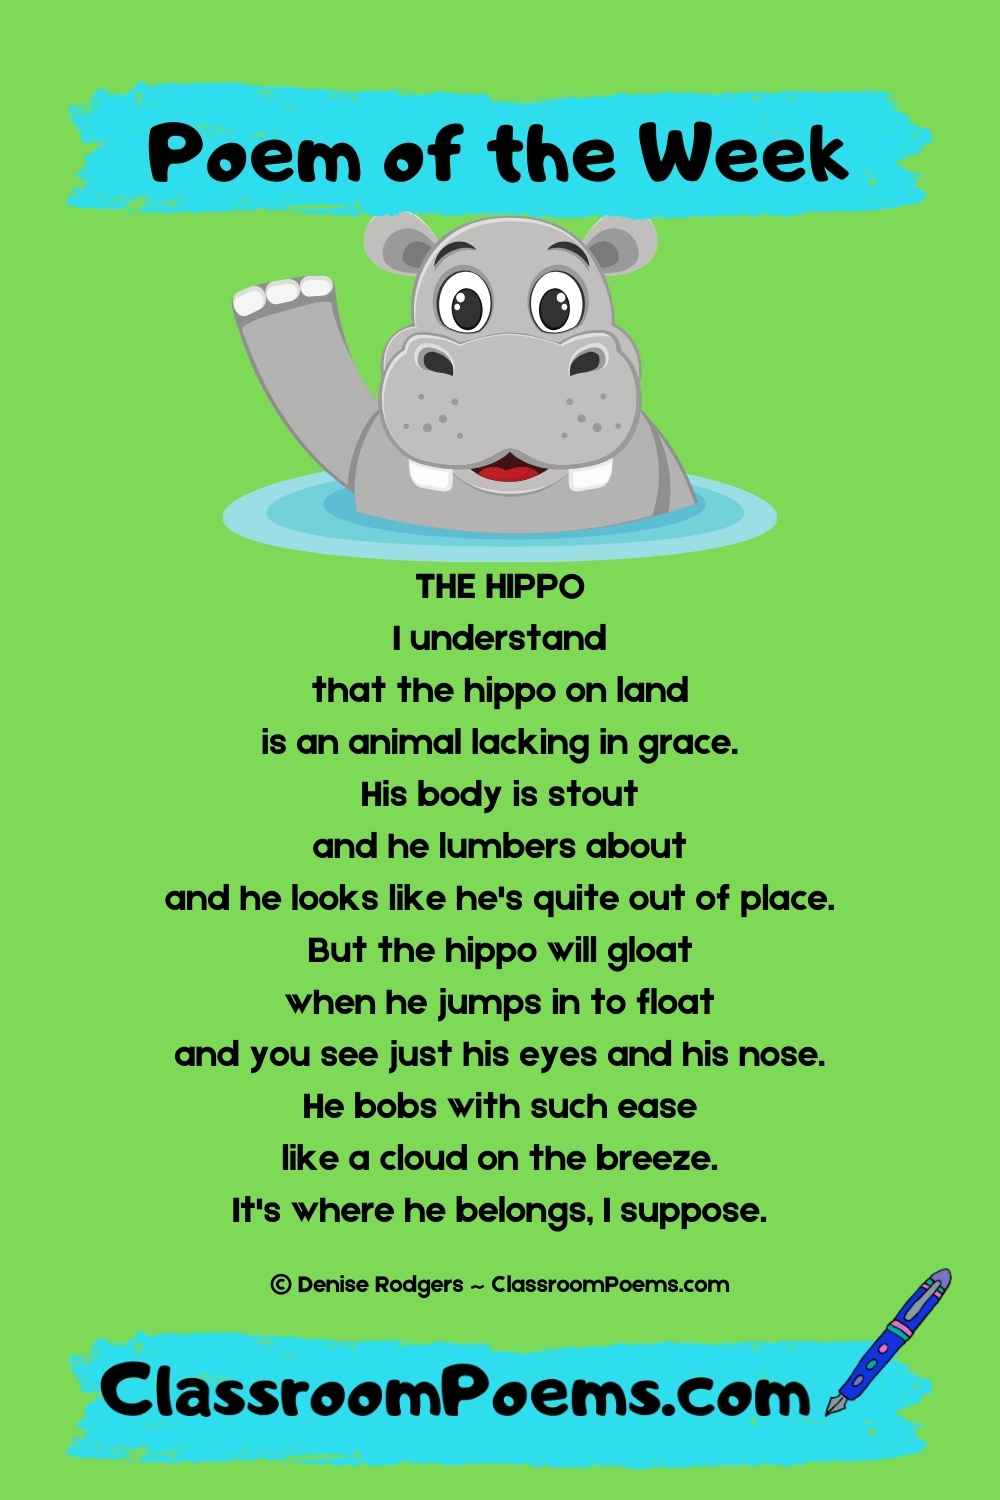 THE HIPPO, a funny zoo poem for kids by Denise Rodgers on ClassroomPoems.com.